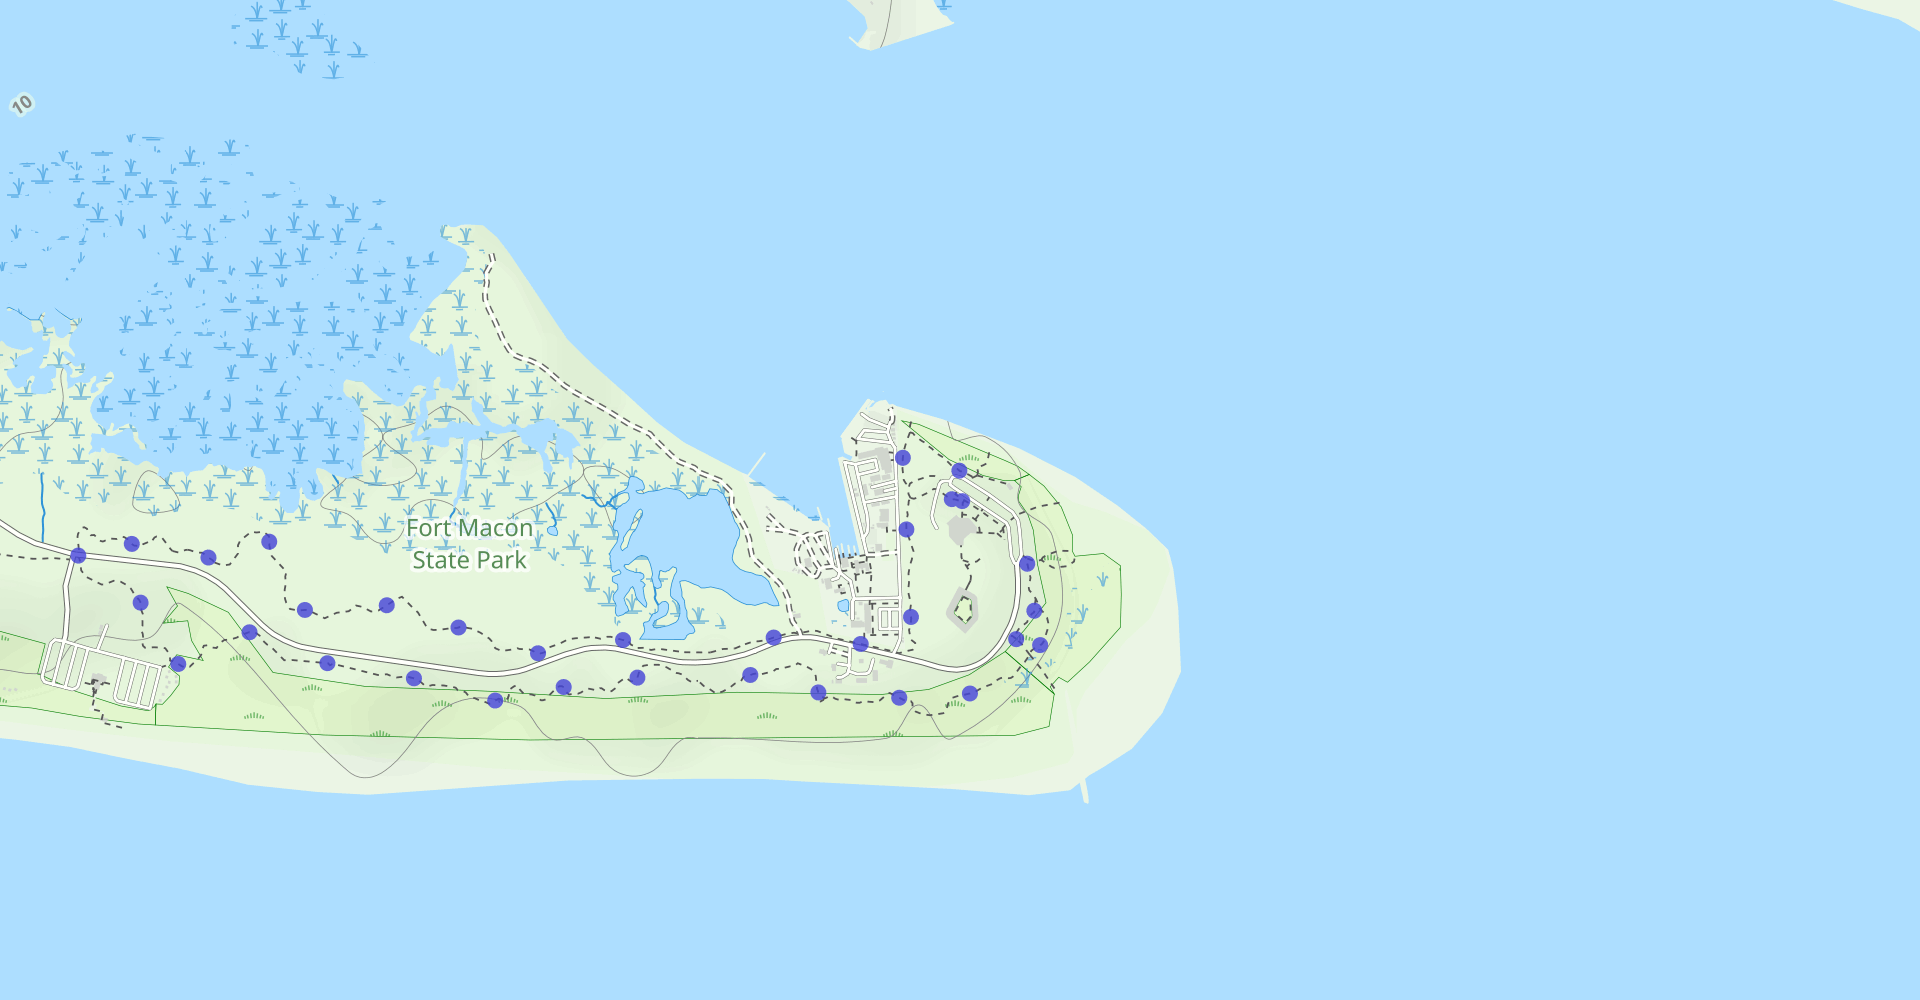 Fort Macon Nature Trail